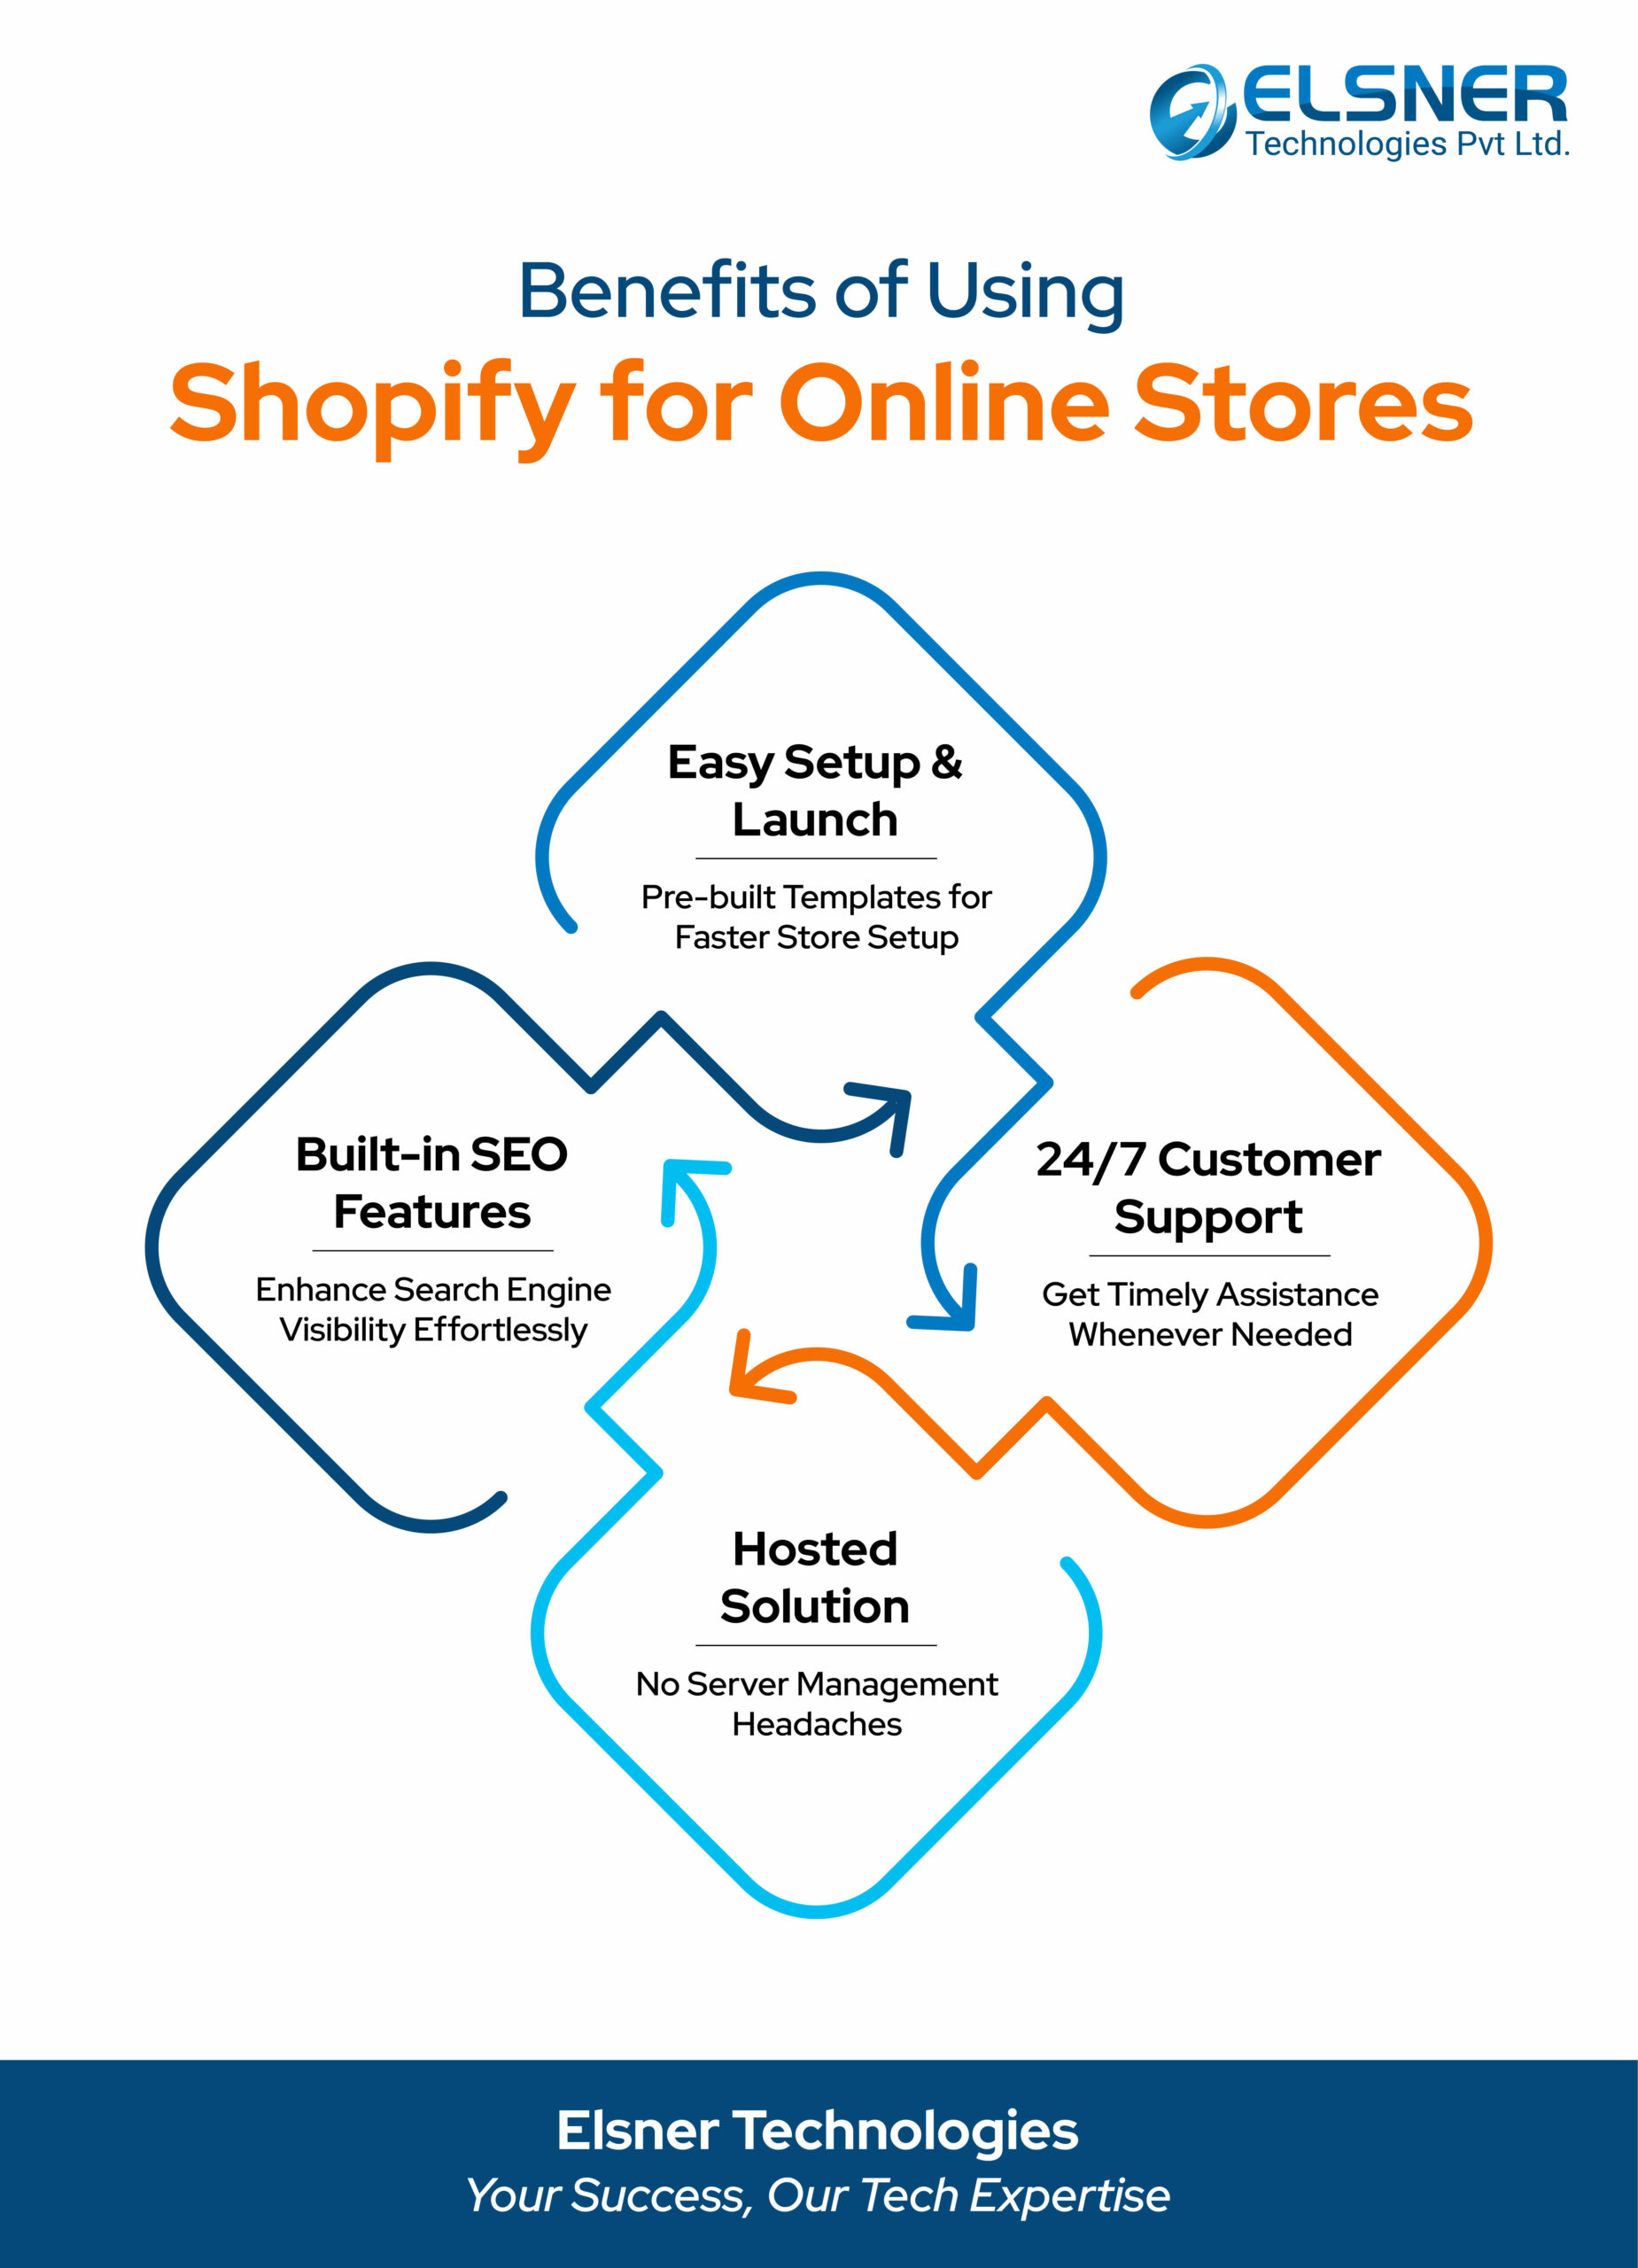 Benefits of Using Shopify For Online Store